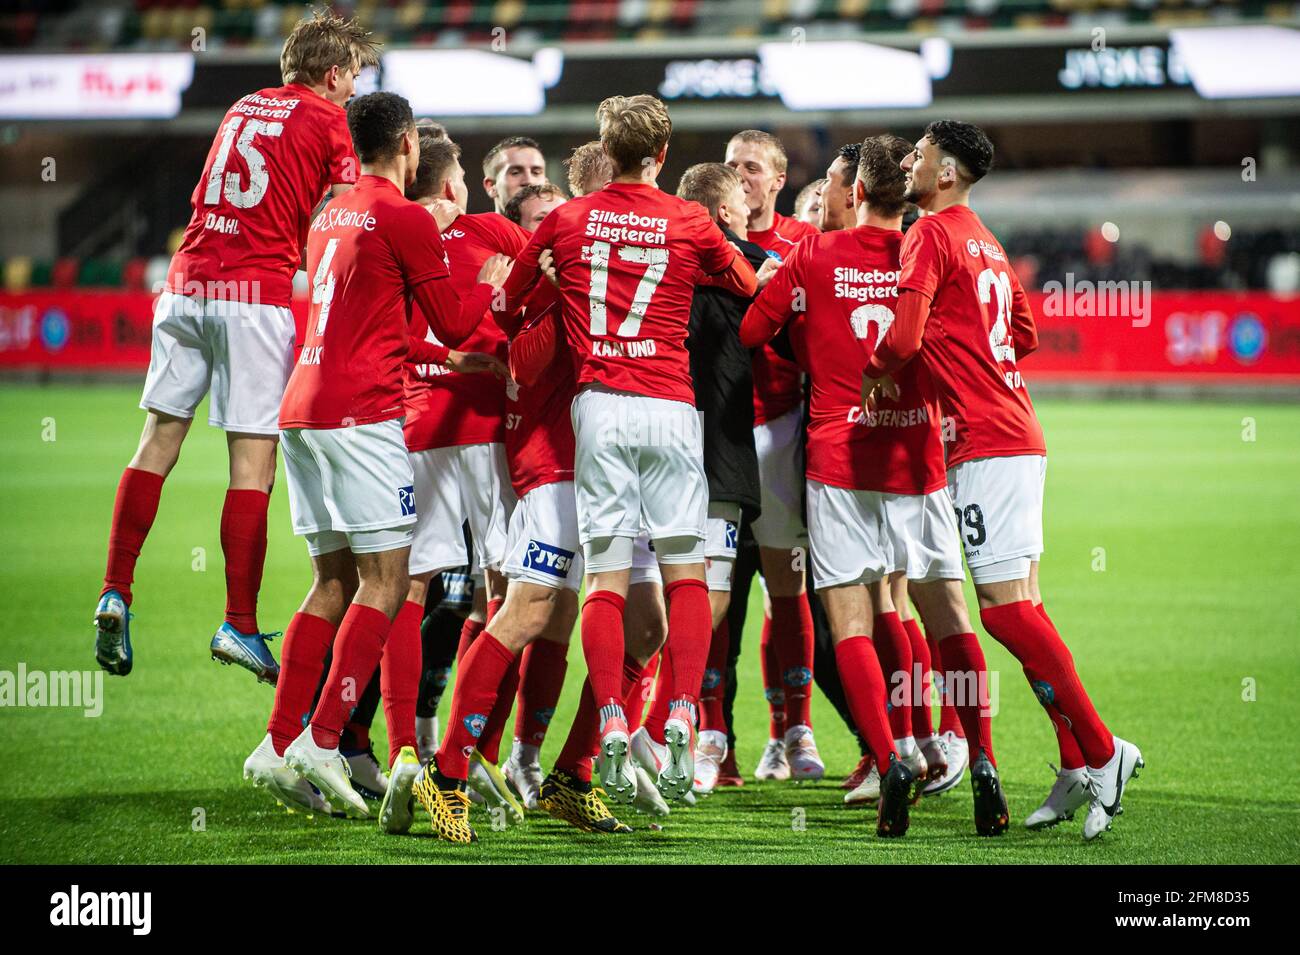 Silkeborg, Denmark. 06th May, 2021. The players of Silkeborg IF celebrate  the 2-0 victory after the NordicBet Liga match between Silkeborg IF and  Esbjerg fB at Jysk Park in Silkeborg. (Photo Credit: